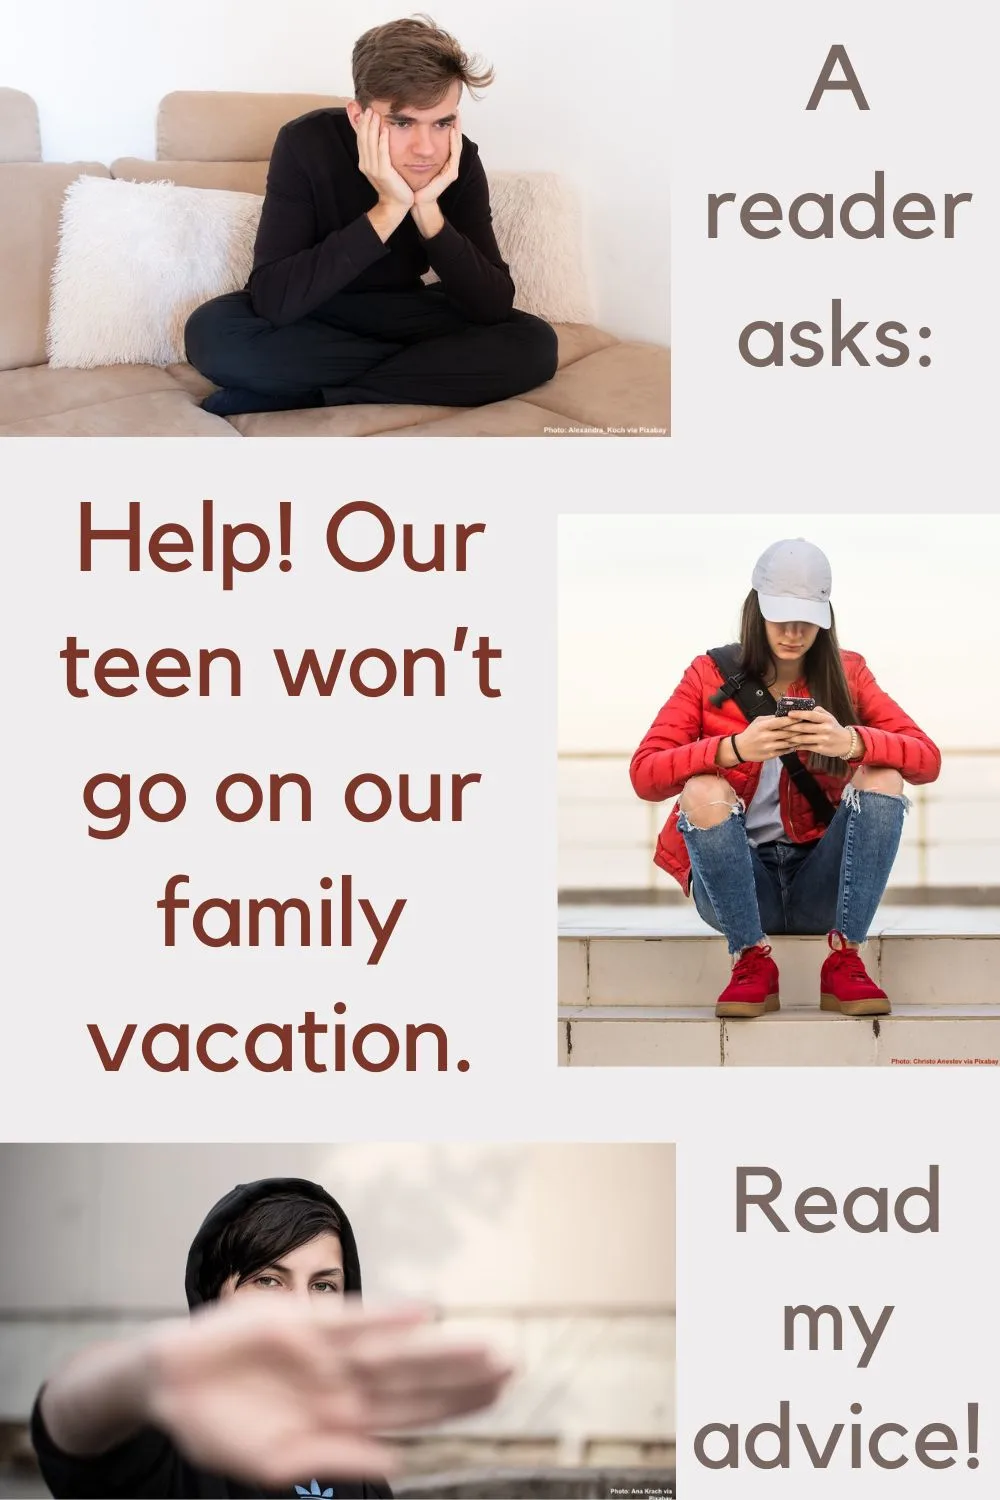 a reader asks what to do when their teen is reluctant to join a family vacation. familiesgo! gives its best advice.